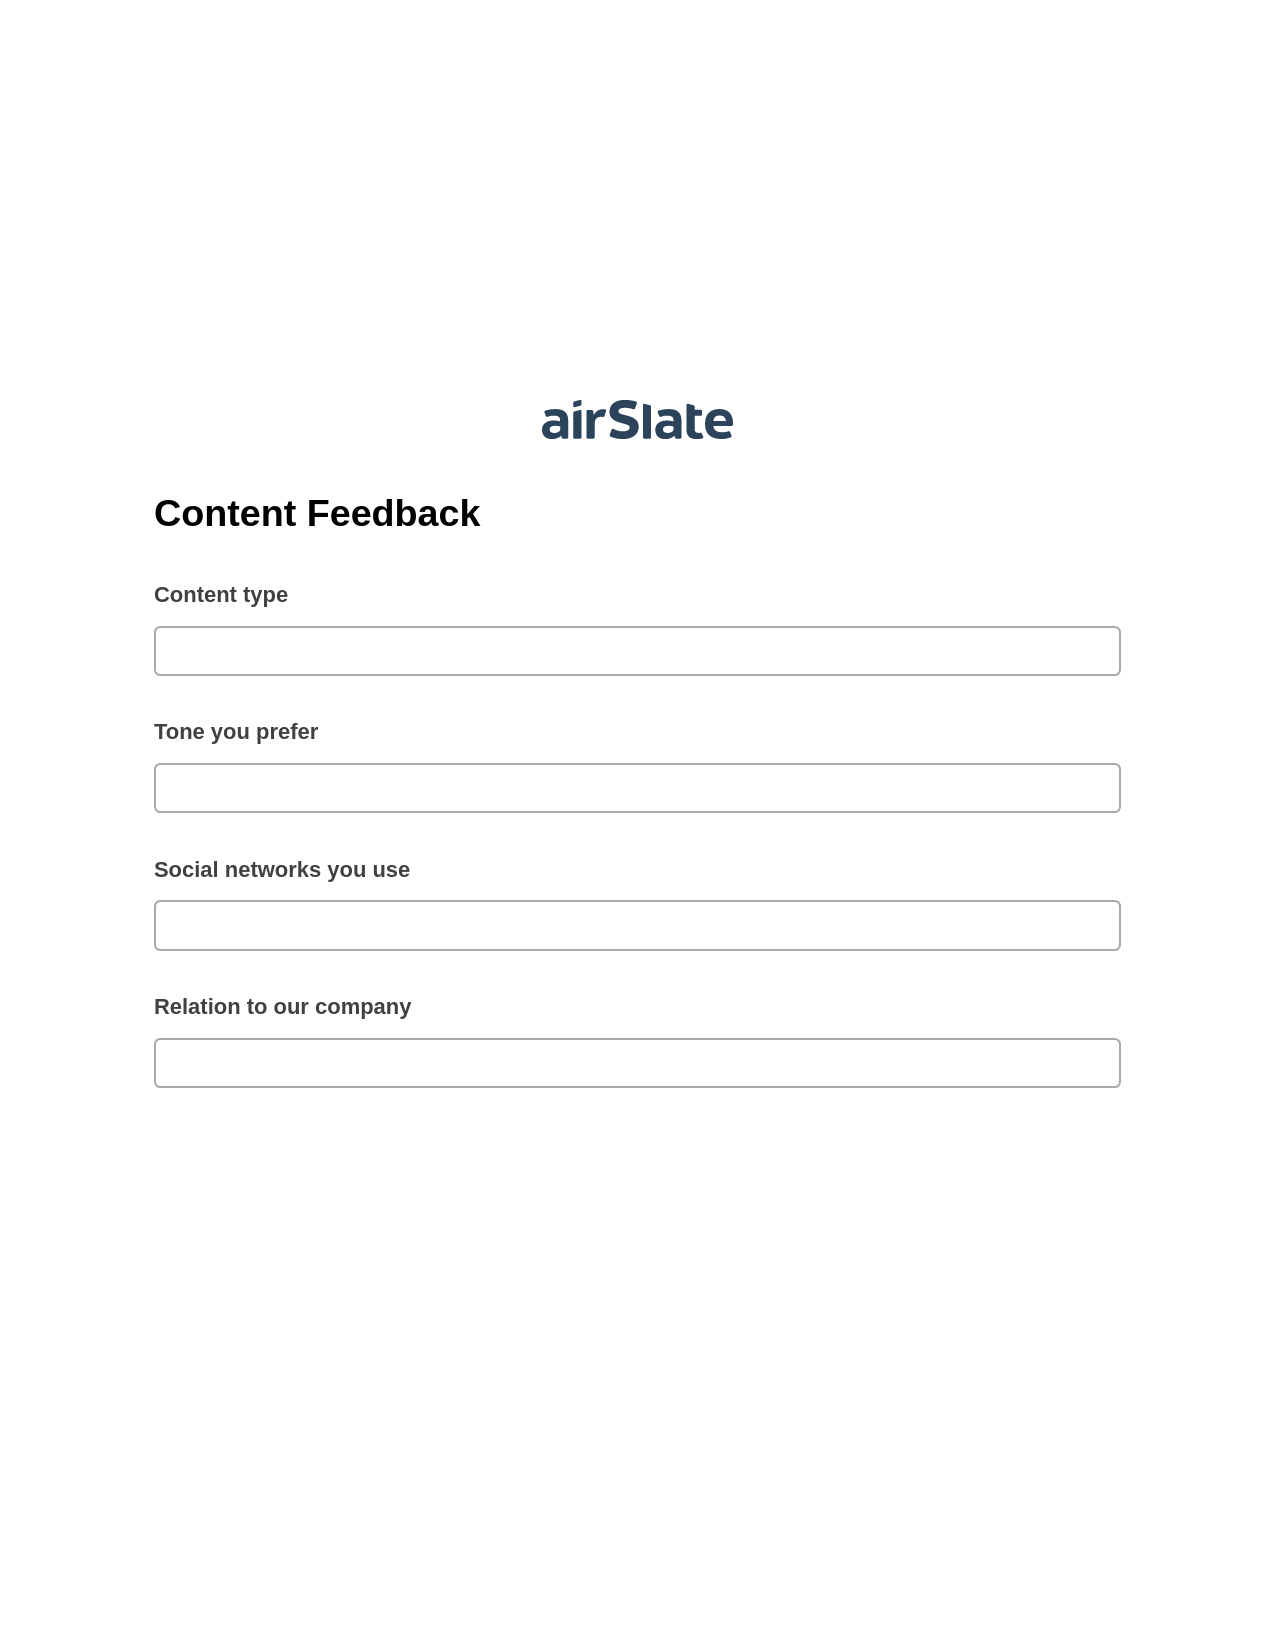 Content Feedback Pre-fill from another Slate Bot, Create Slate Reminder Bot, Export to Smartsheet